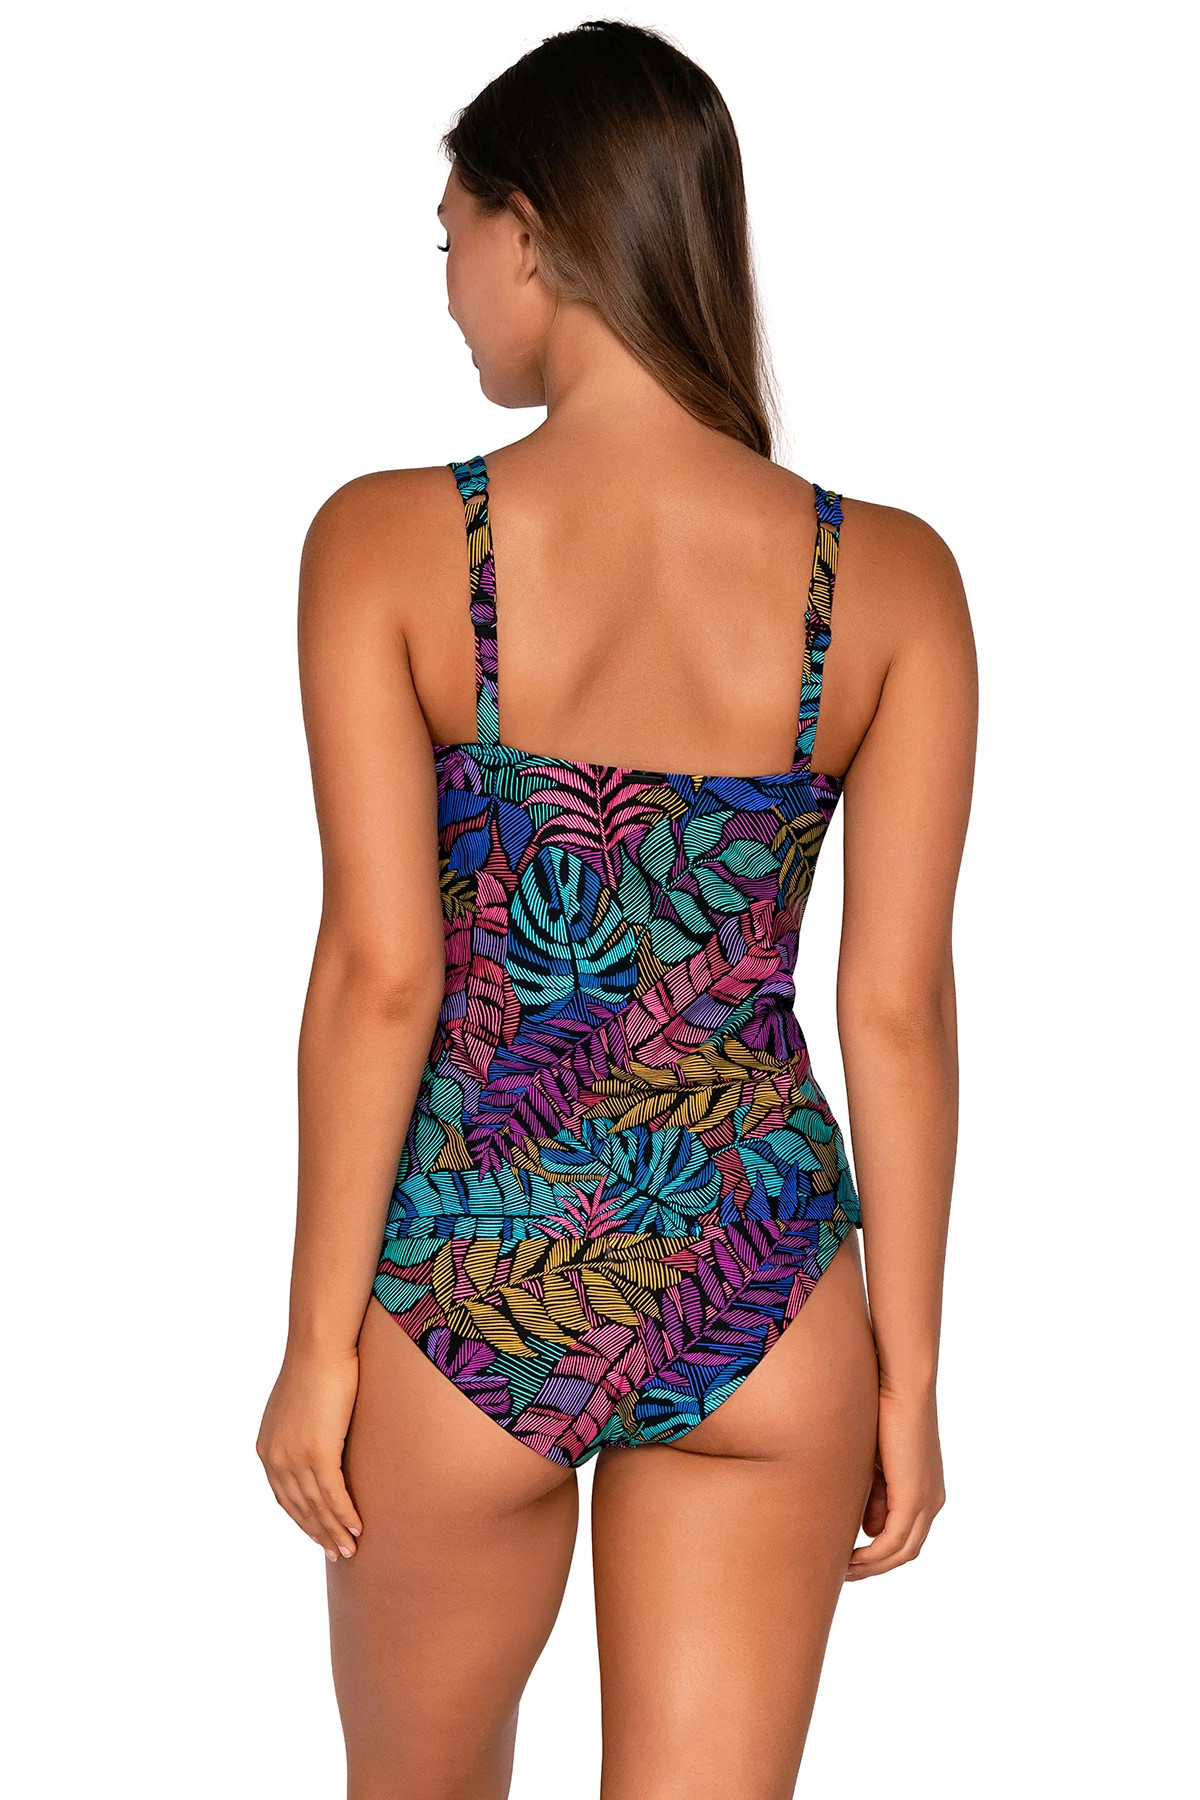 PANAMA PALMS Taylor Underwire Tankini Top (E-H Cup) image number 2